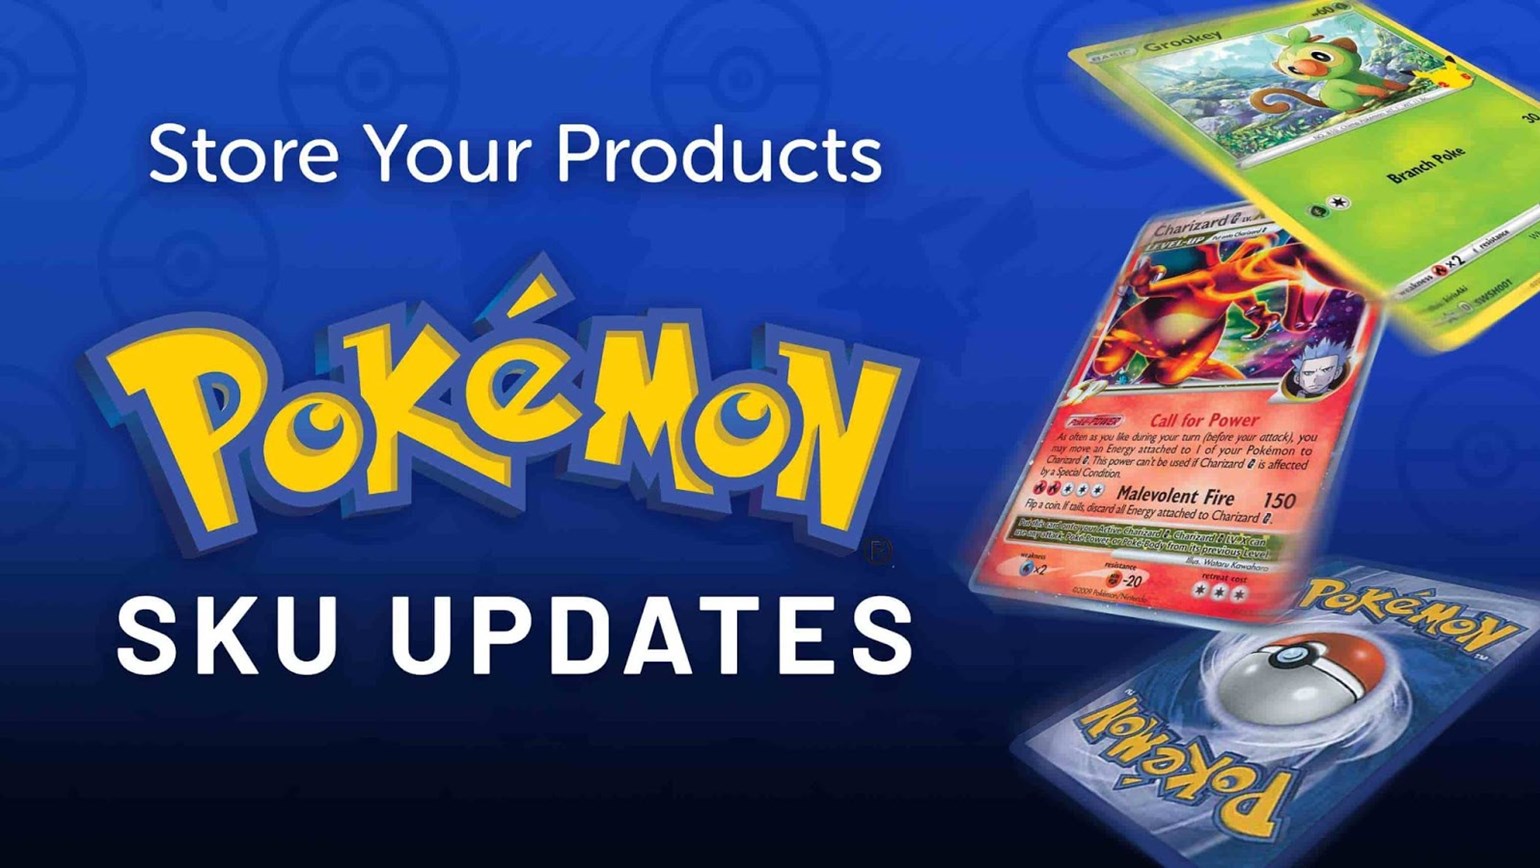 15,213 SKUs Added To Pokémon Store Your Products Pull Sheet